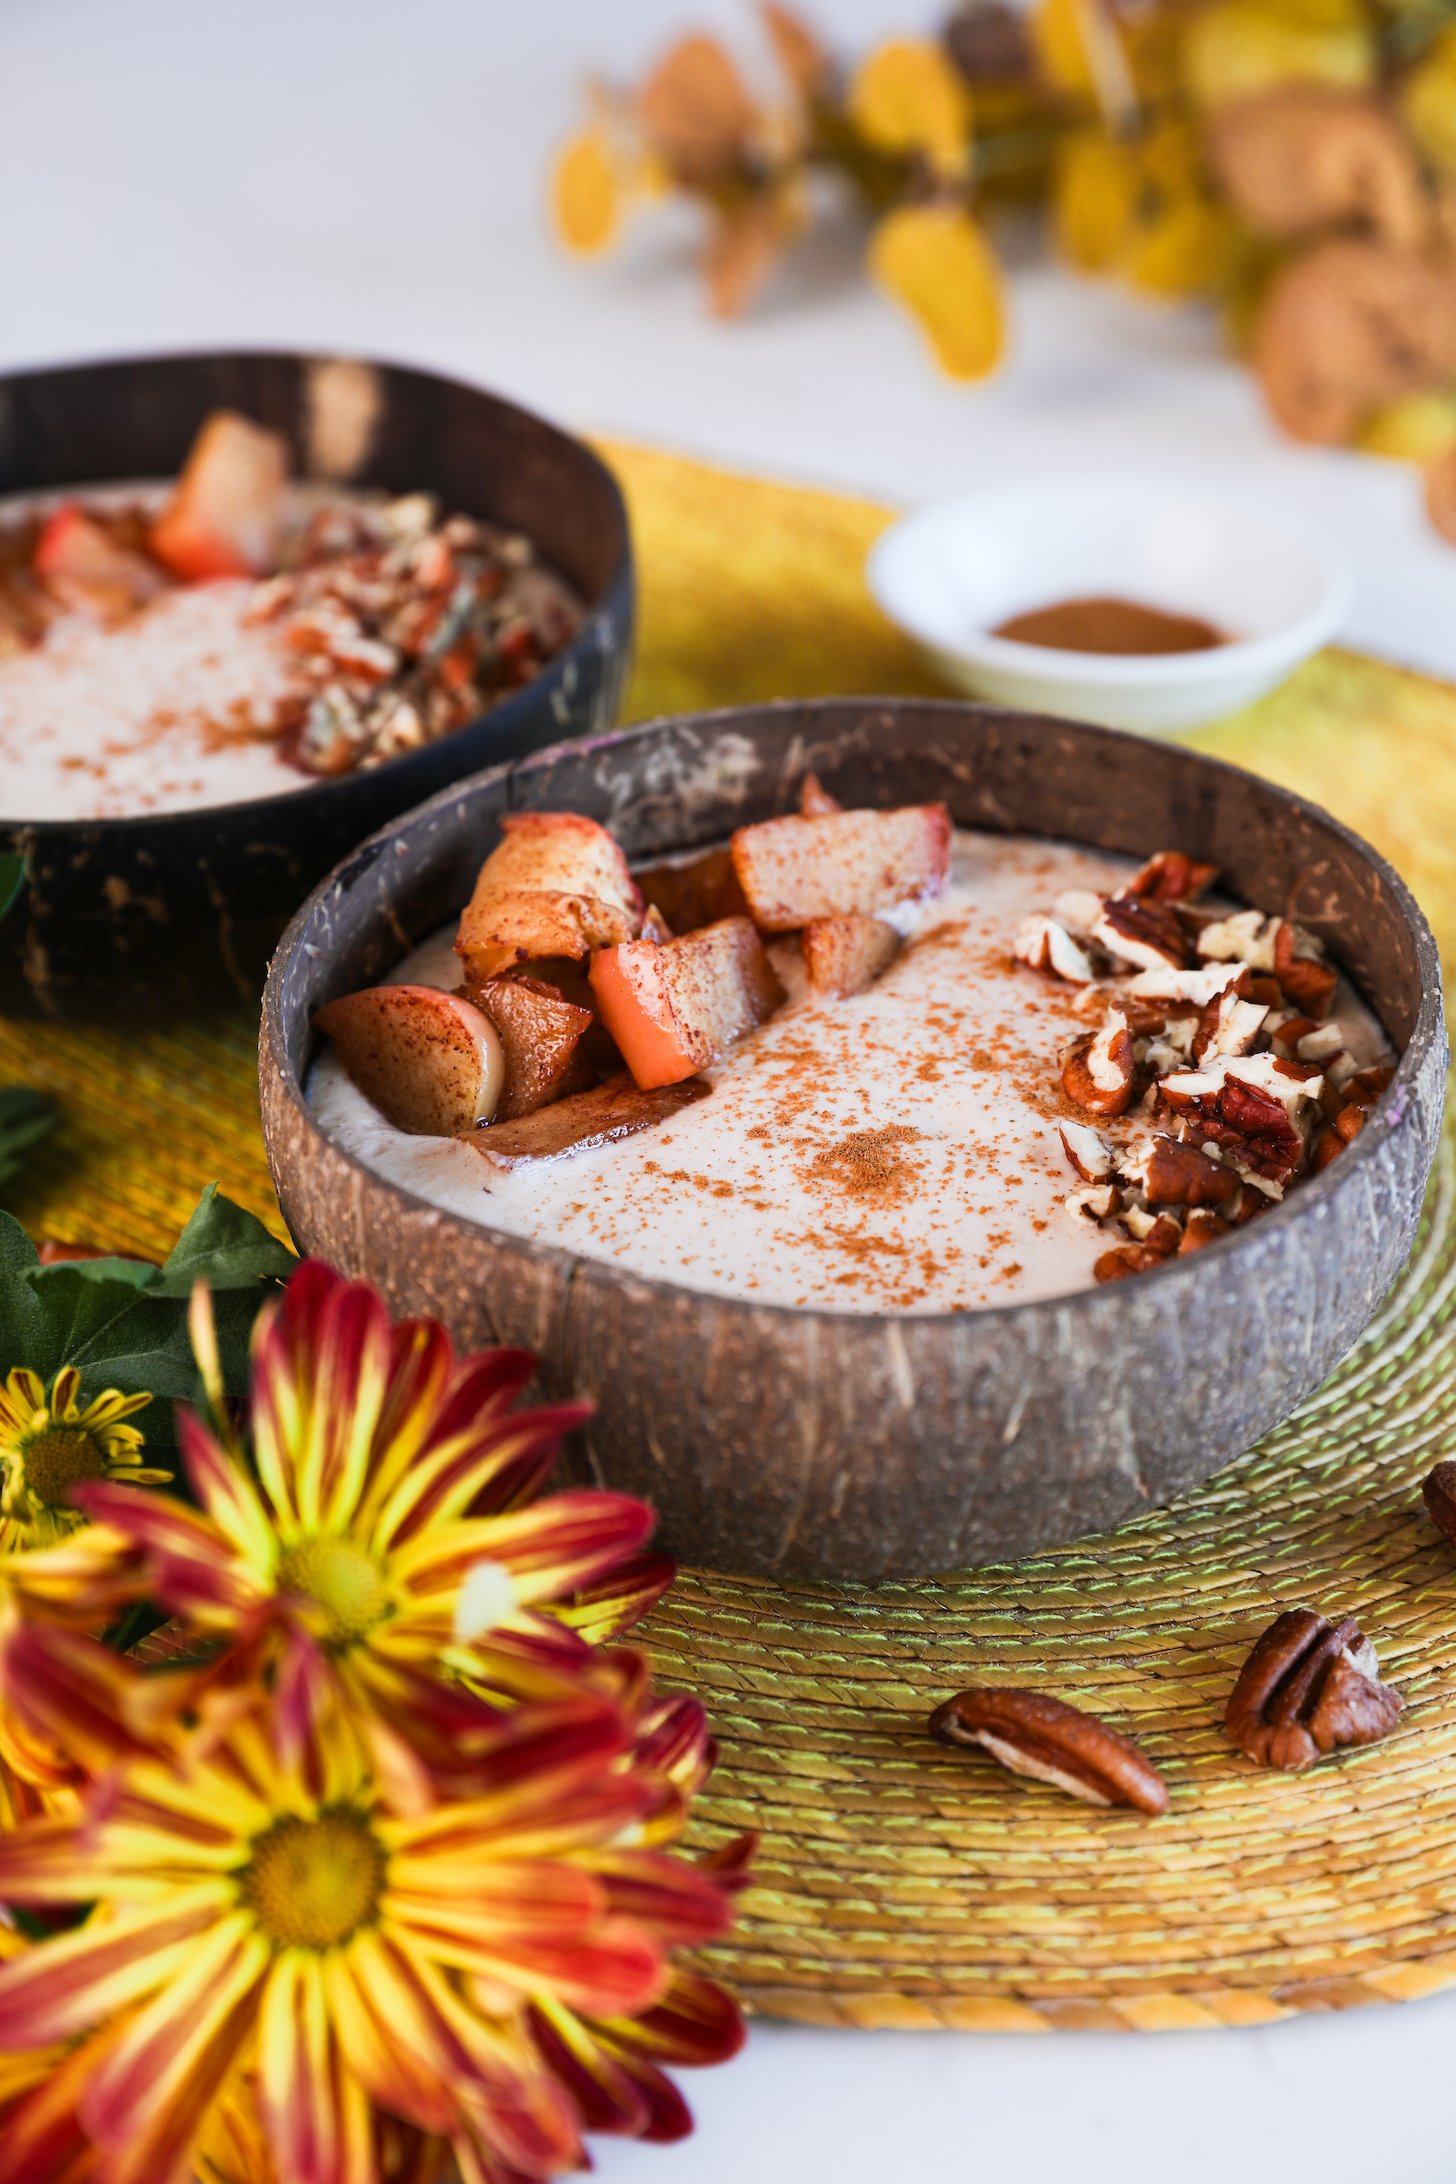 Image of two coconut bowls filled with beige smoothie, garnished with baked apple slices, pecans, and cinnamon, with bright yellow flowers in the foreground.